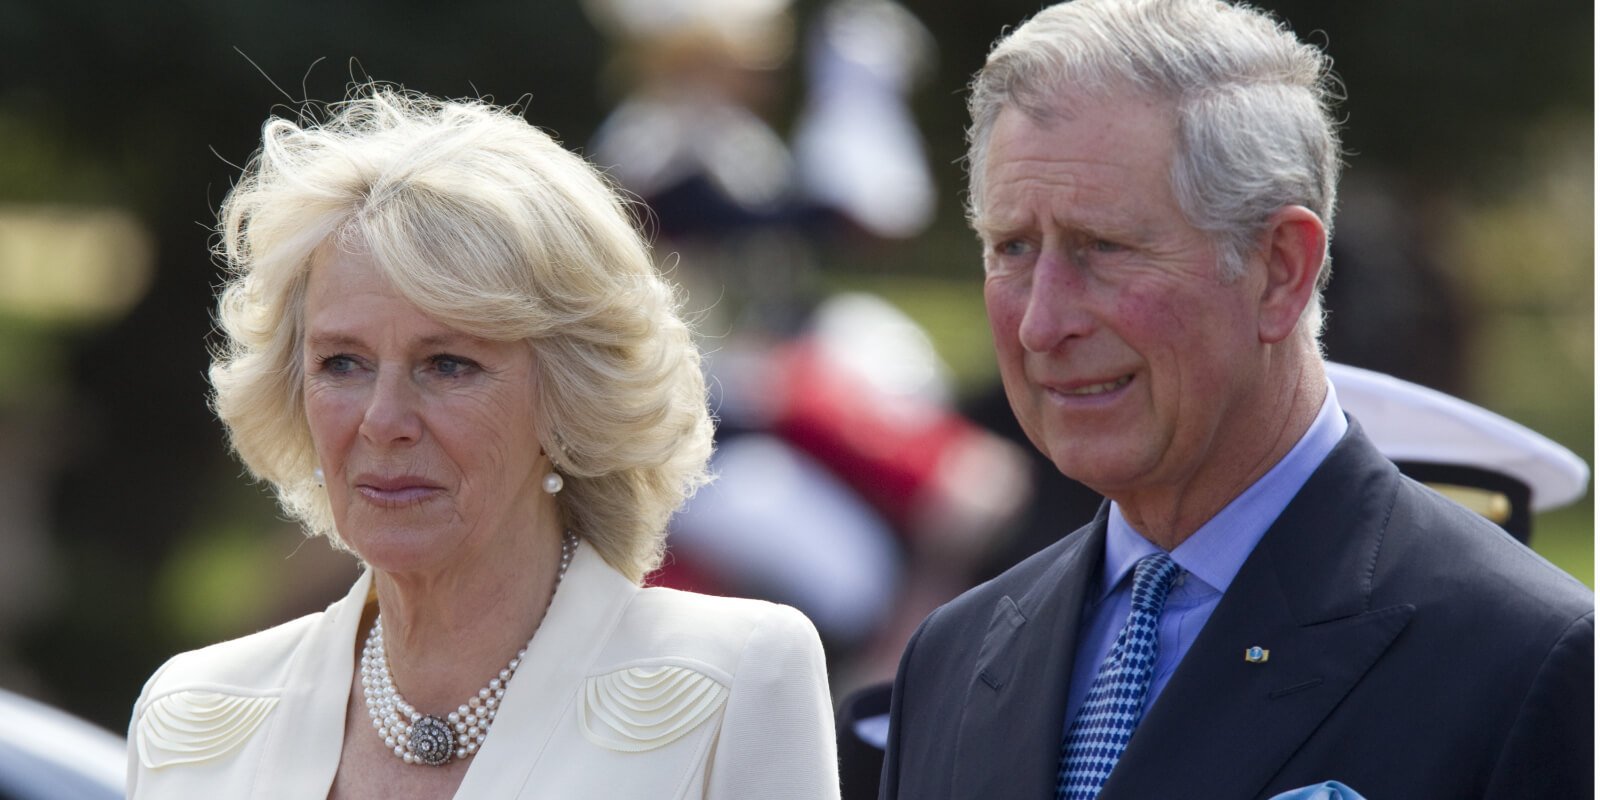 Camilla Parker Bowles and King Charles III photographed together in 2011.